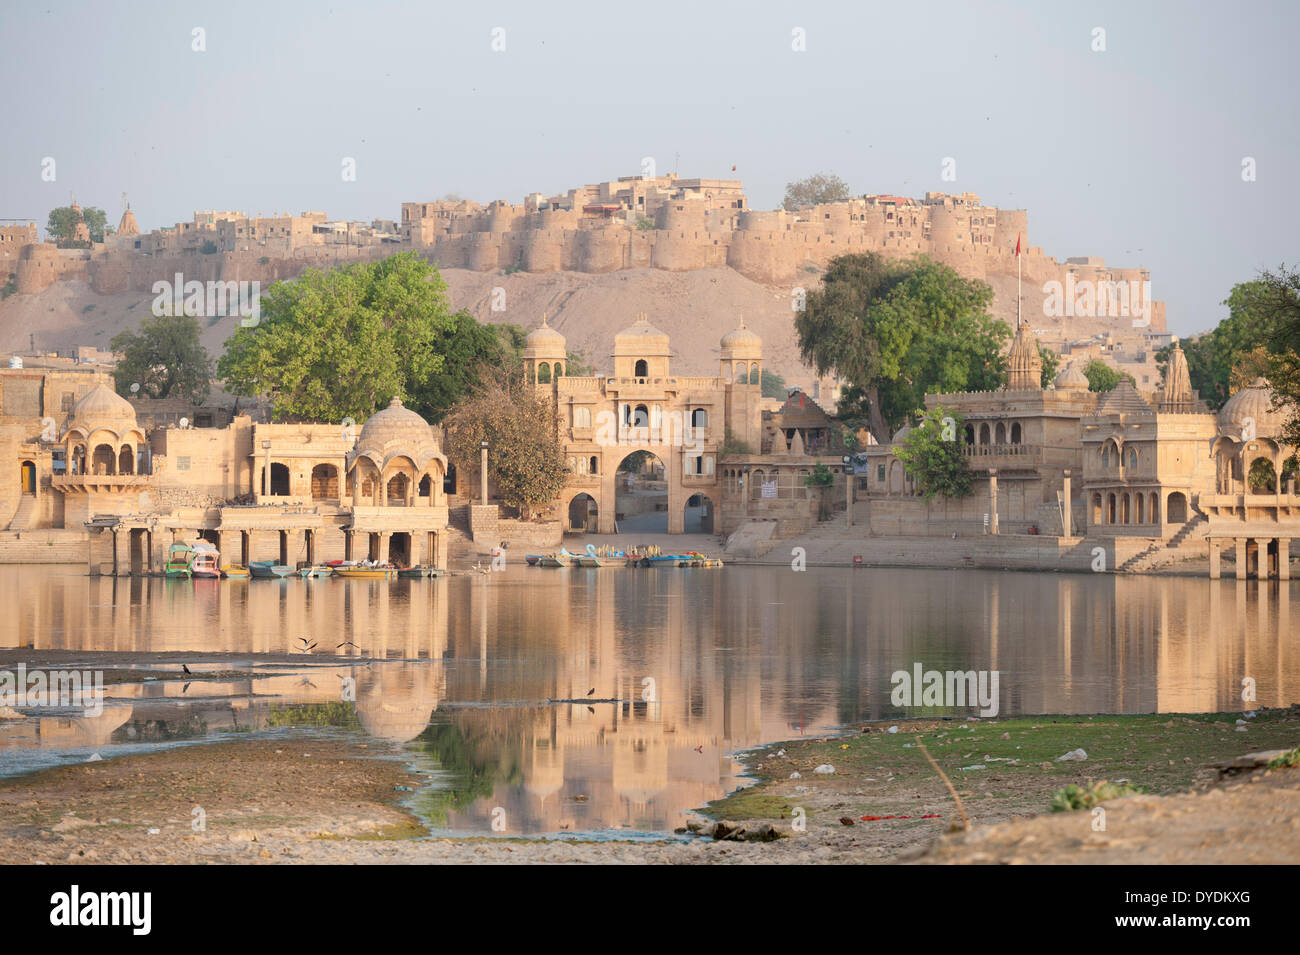 Gadi Sagar, Jaisalmer, Rajasthan, India. 15th April, 2014. 6.00 AM and the buildings surrounding the Gadi Sagar lake and the Jaisalmer Fort in the distance are already drenched in the Rajasthani sun's golden rays. Credit:  Lee Thomas/Alamy Live News Stock Photo